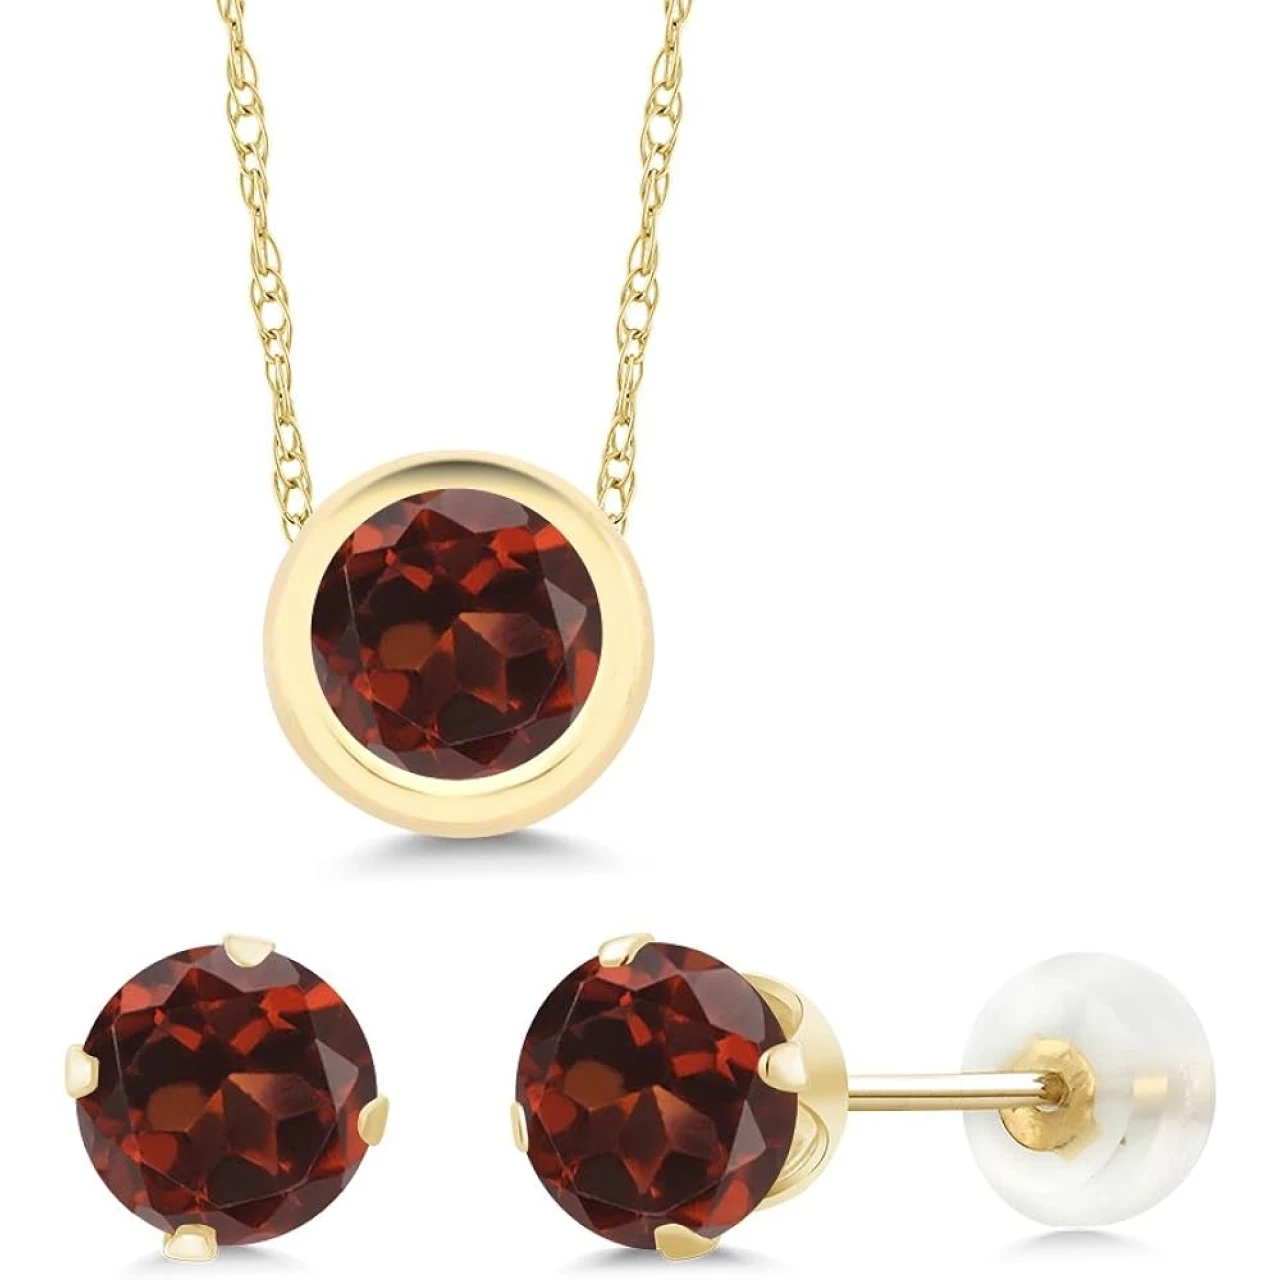 Gem Stone King 14K Yellow Gold Red Garnet Pendant and Earrings Jewelry Set